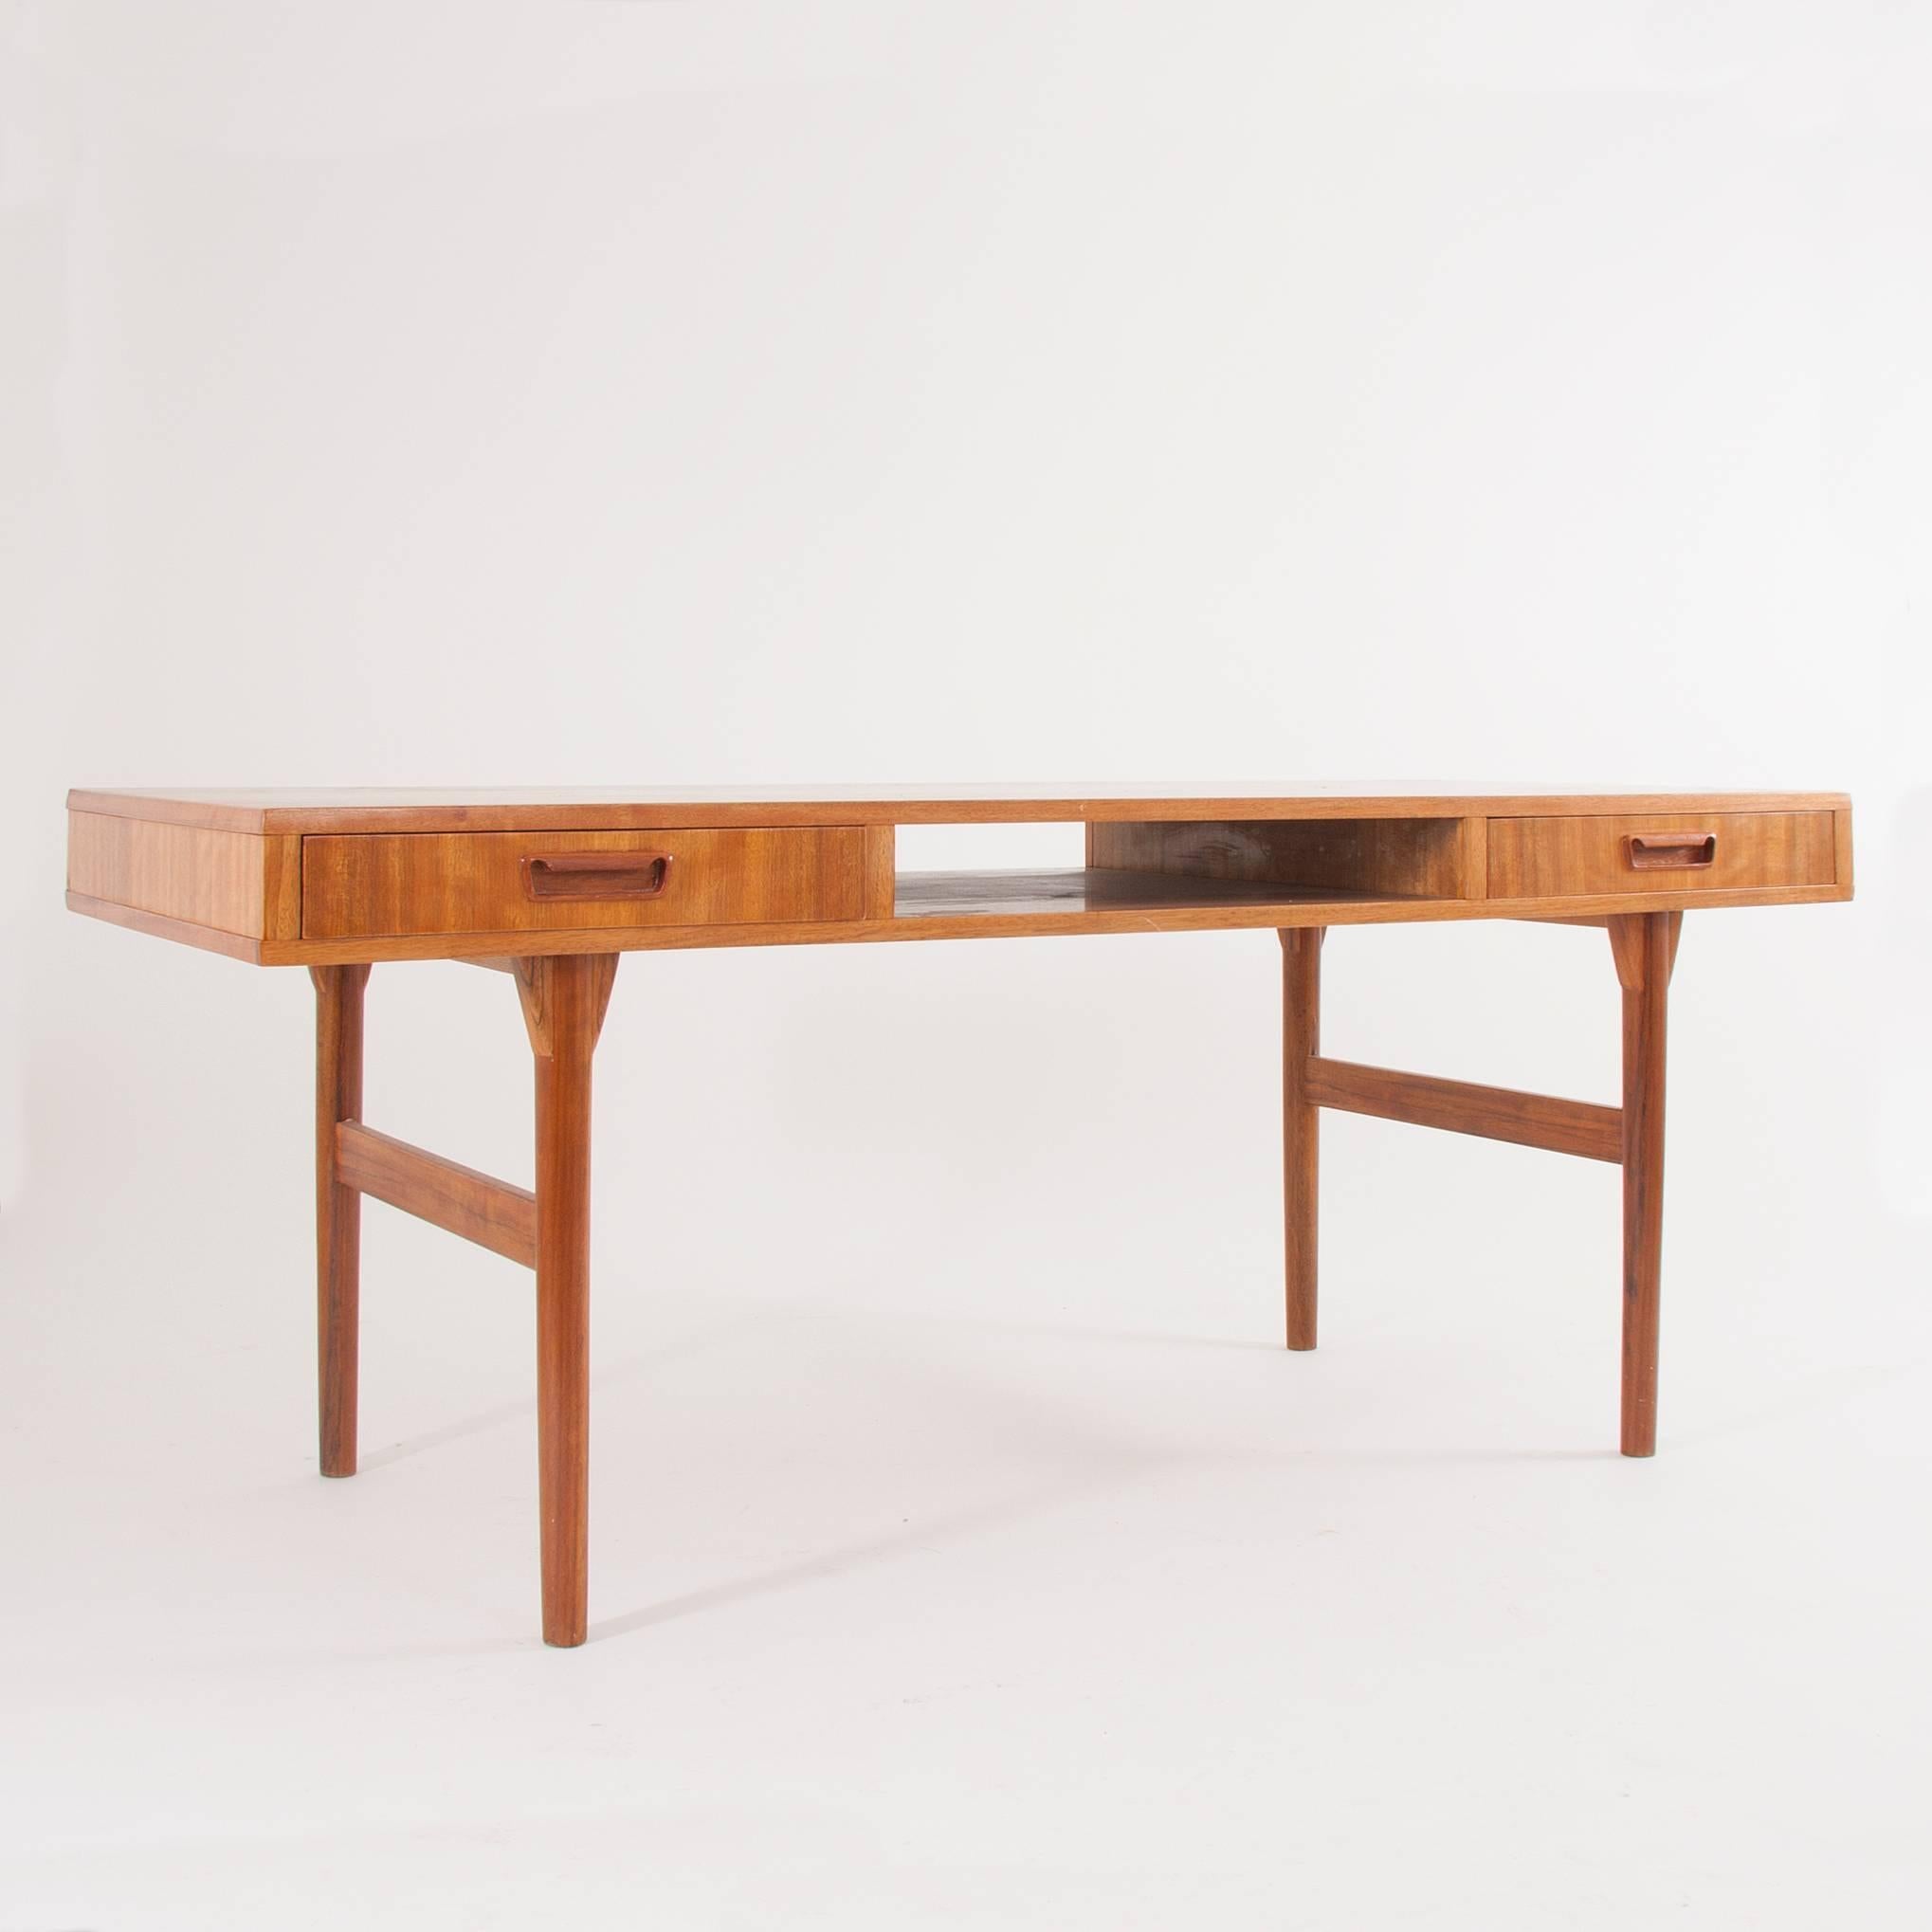 A beautiful coffee table in teak from the 1950s, designed by Nanna and Jörgen Ditzel, executed by Sören Willadsen in Denmark. Have two drawers and a magazine slot in the center. In excellent condition.